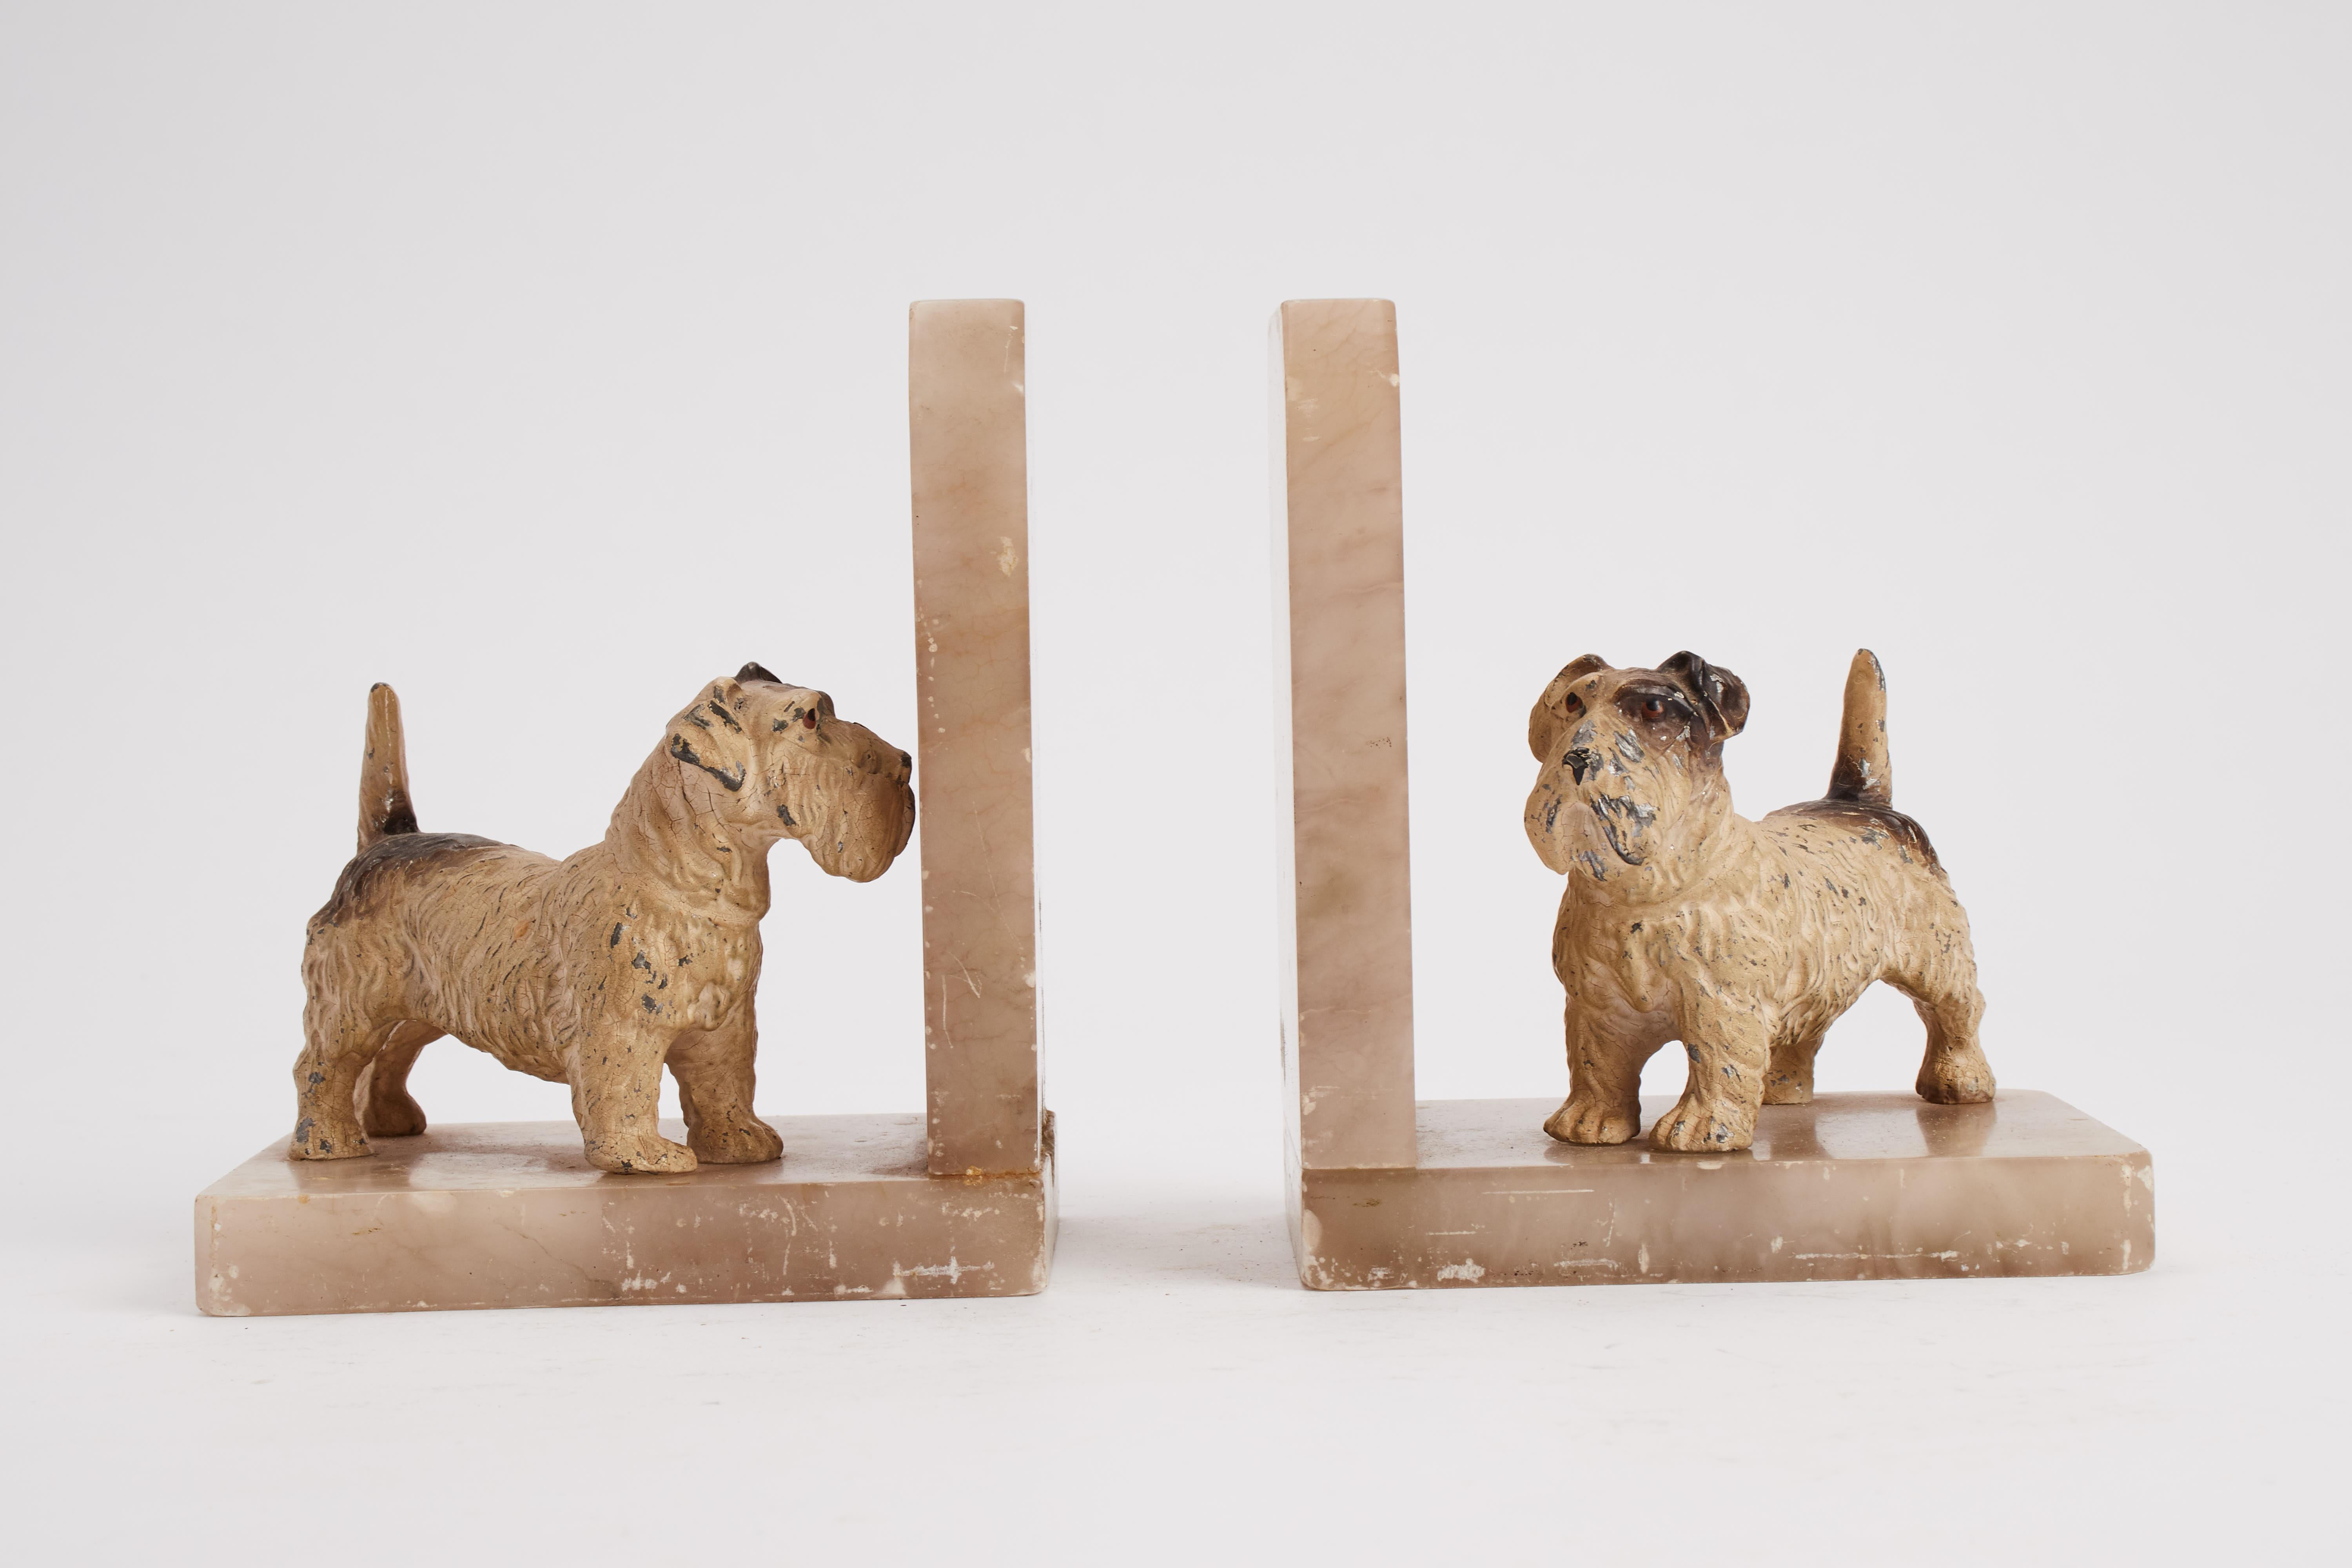 The pair is identical, showing a pale marble base with two elements at 90 degrees. Over the base, two white metal sculptures, color finished, depicting Sealyham terrier dog. England, 1920.